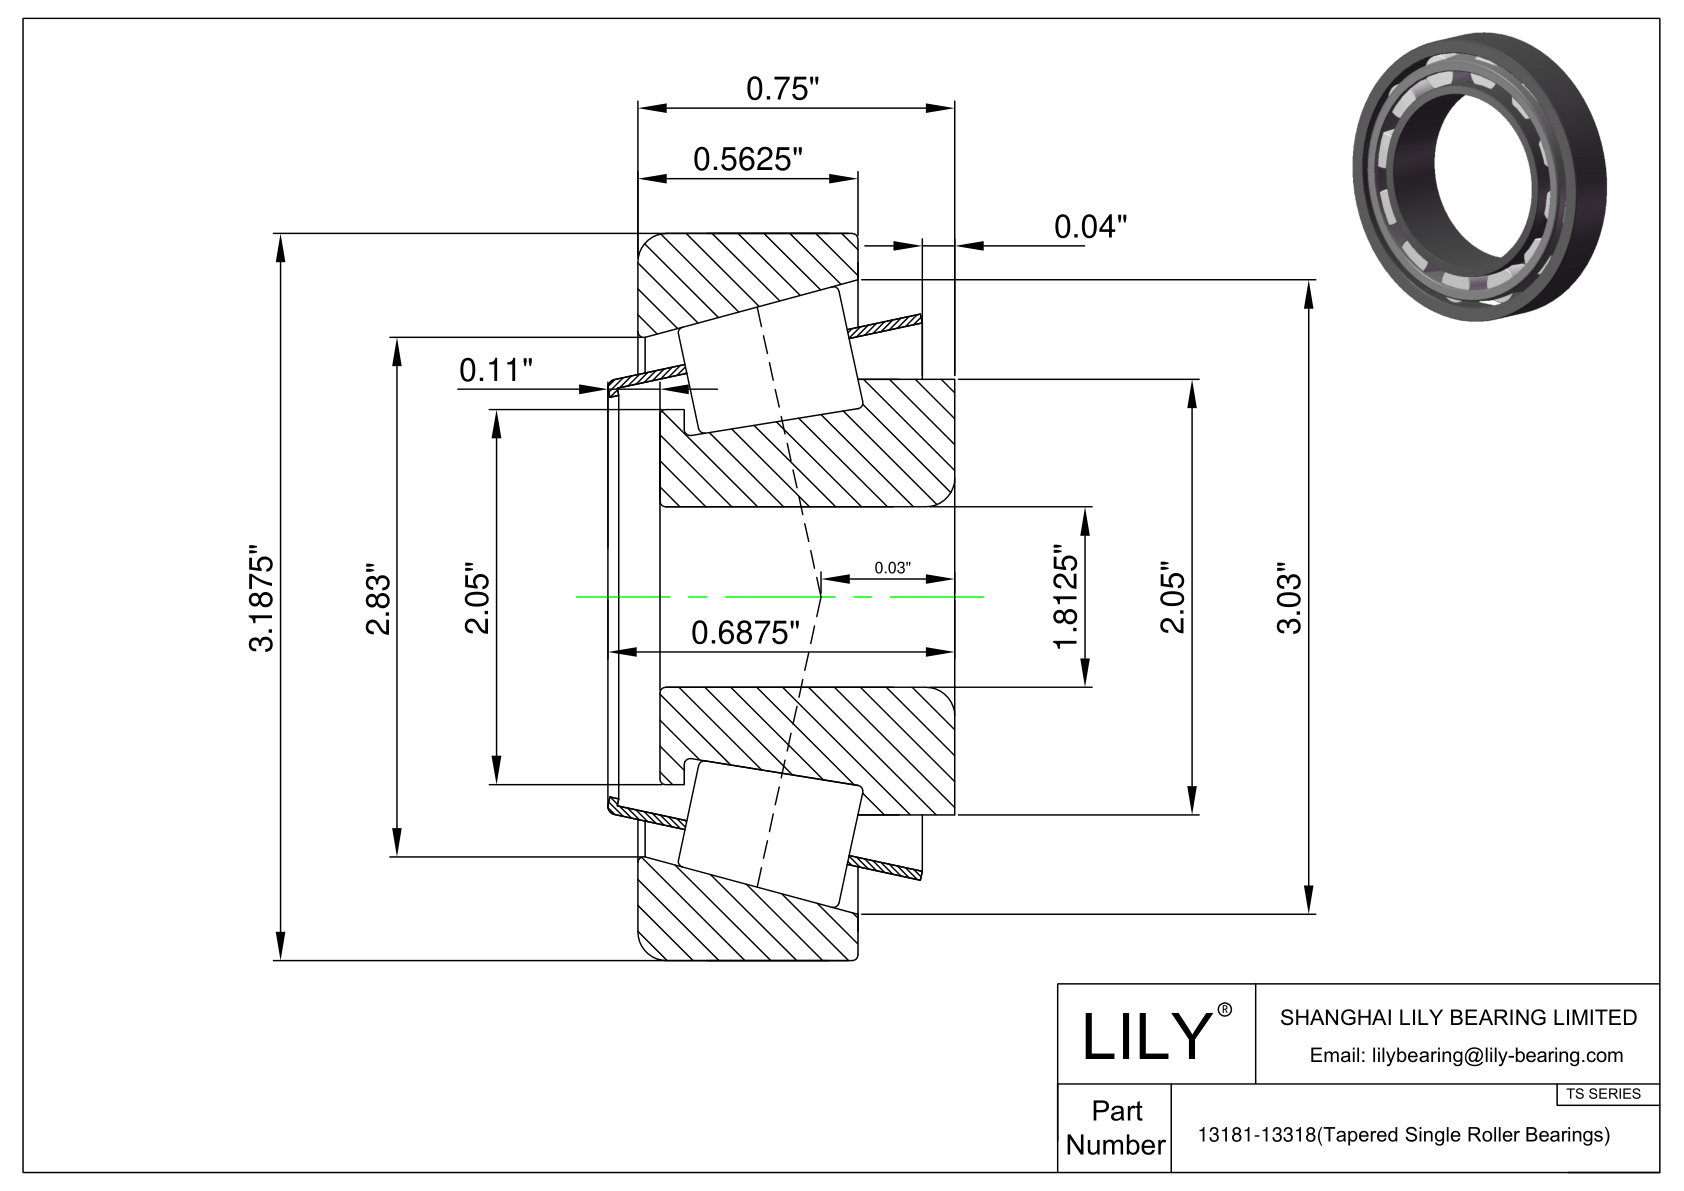 13181-13318 TS (Tapered Single Roller Bearings) (Imperial) cad drawing